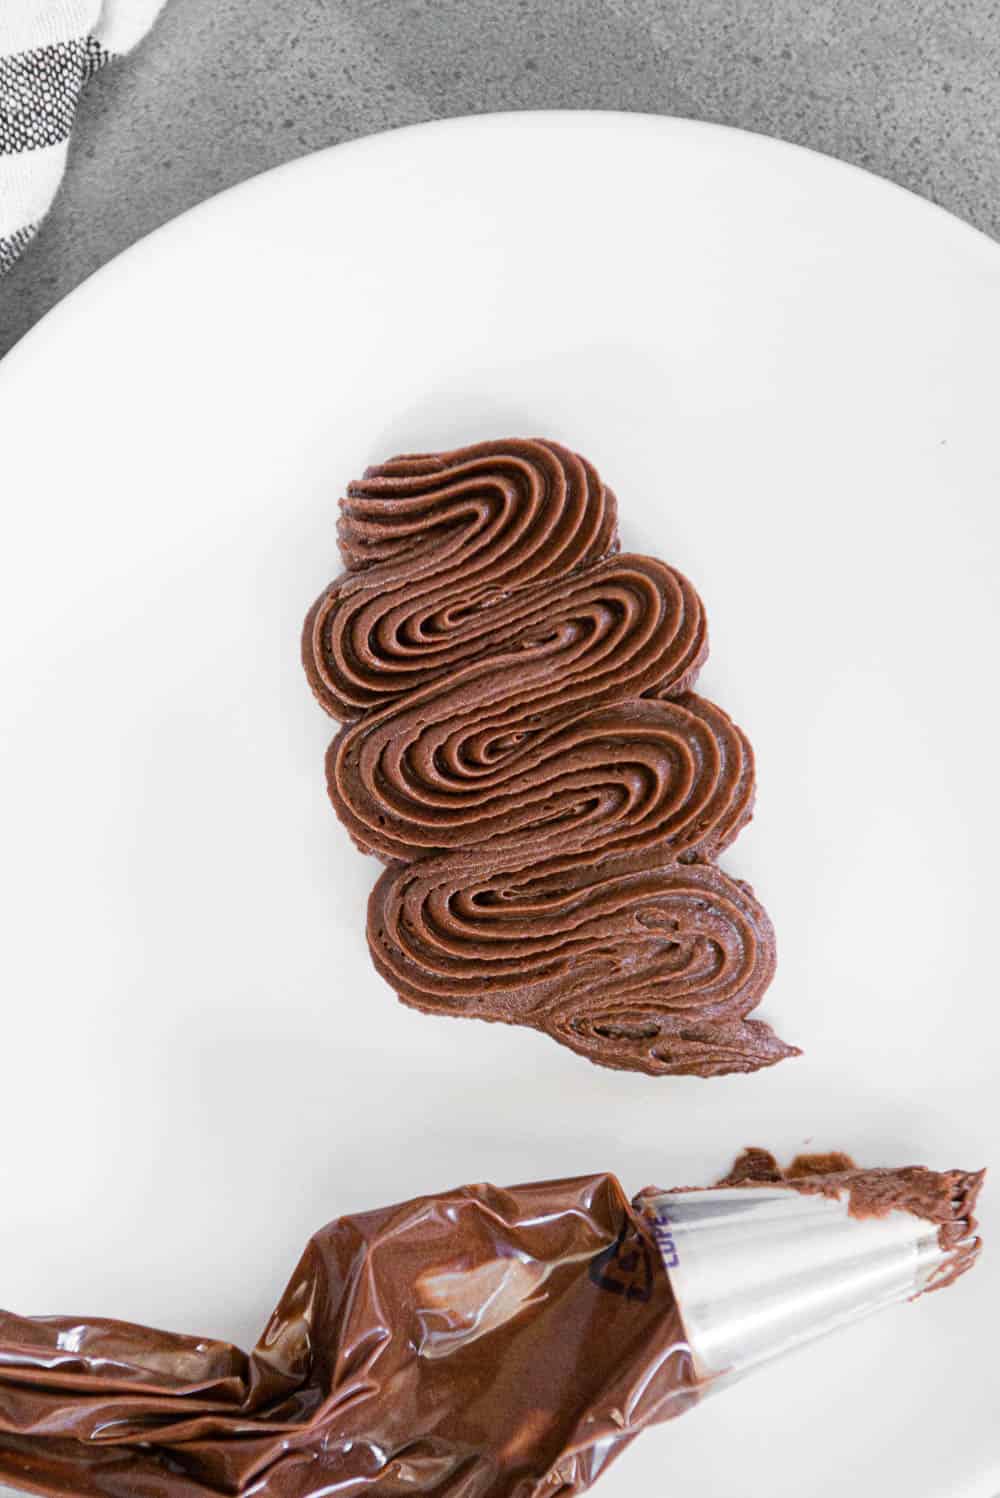 swirl of homemade chocolate frosting on white plate